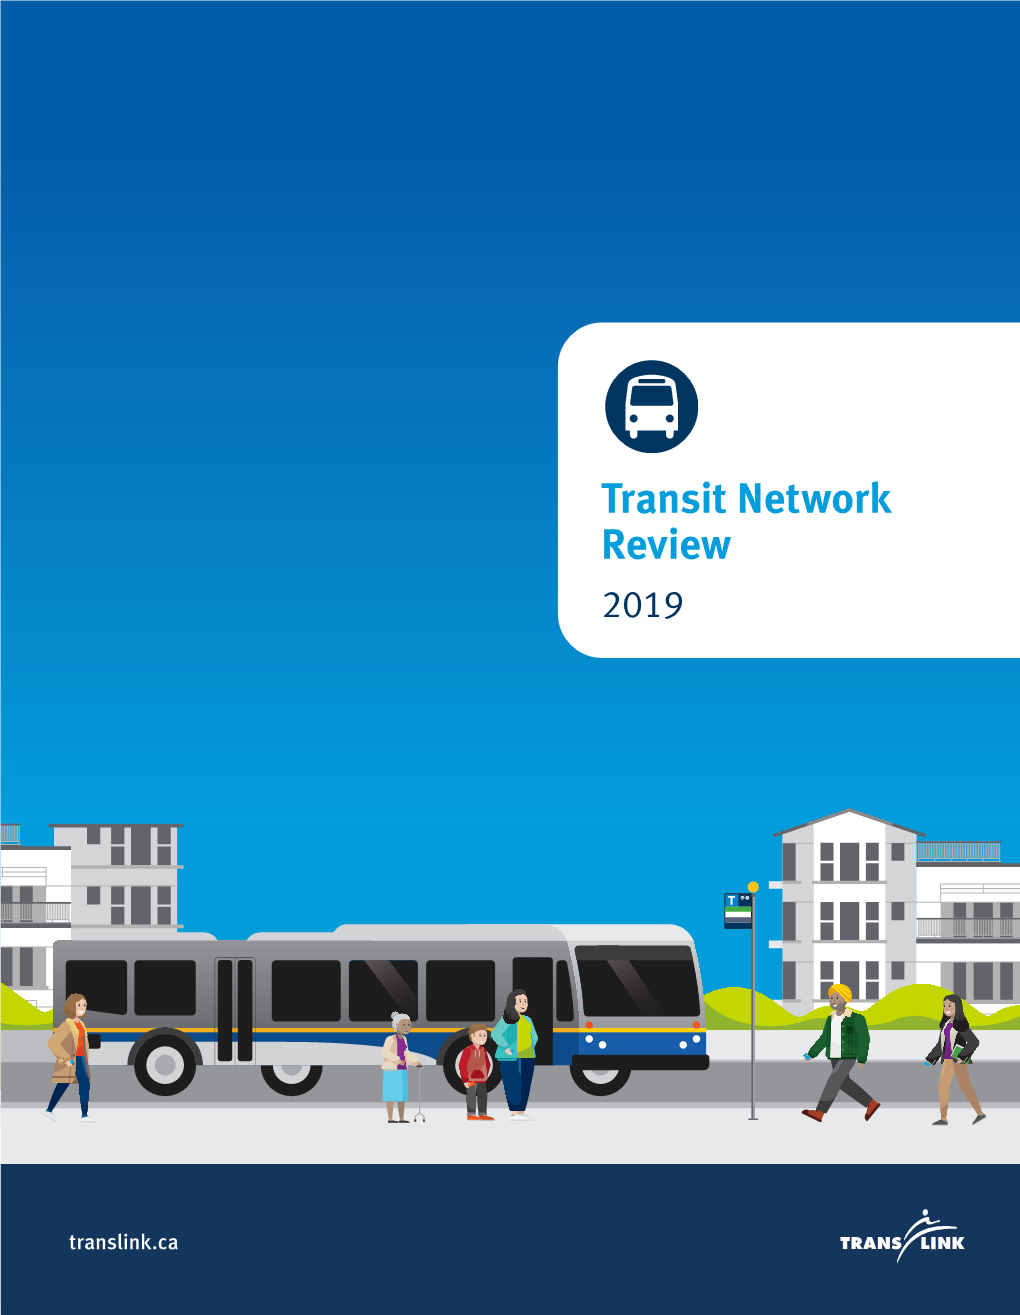 Transit Network Review 2019